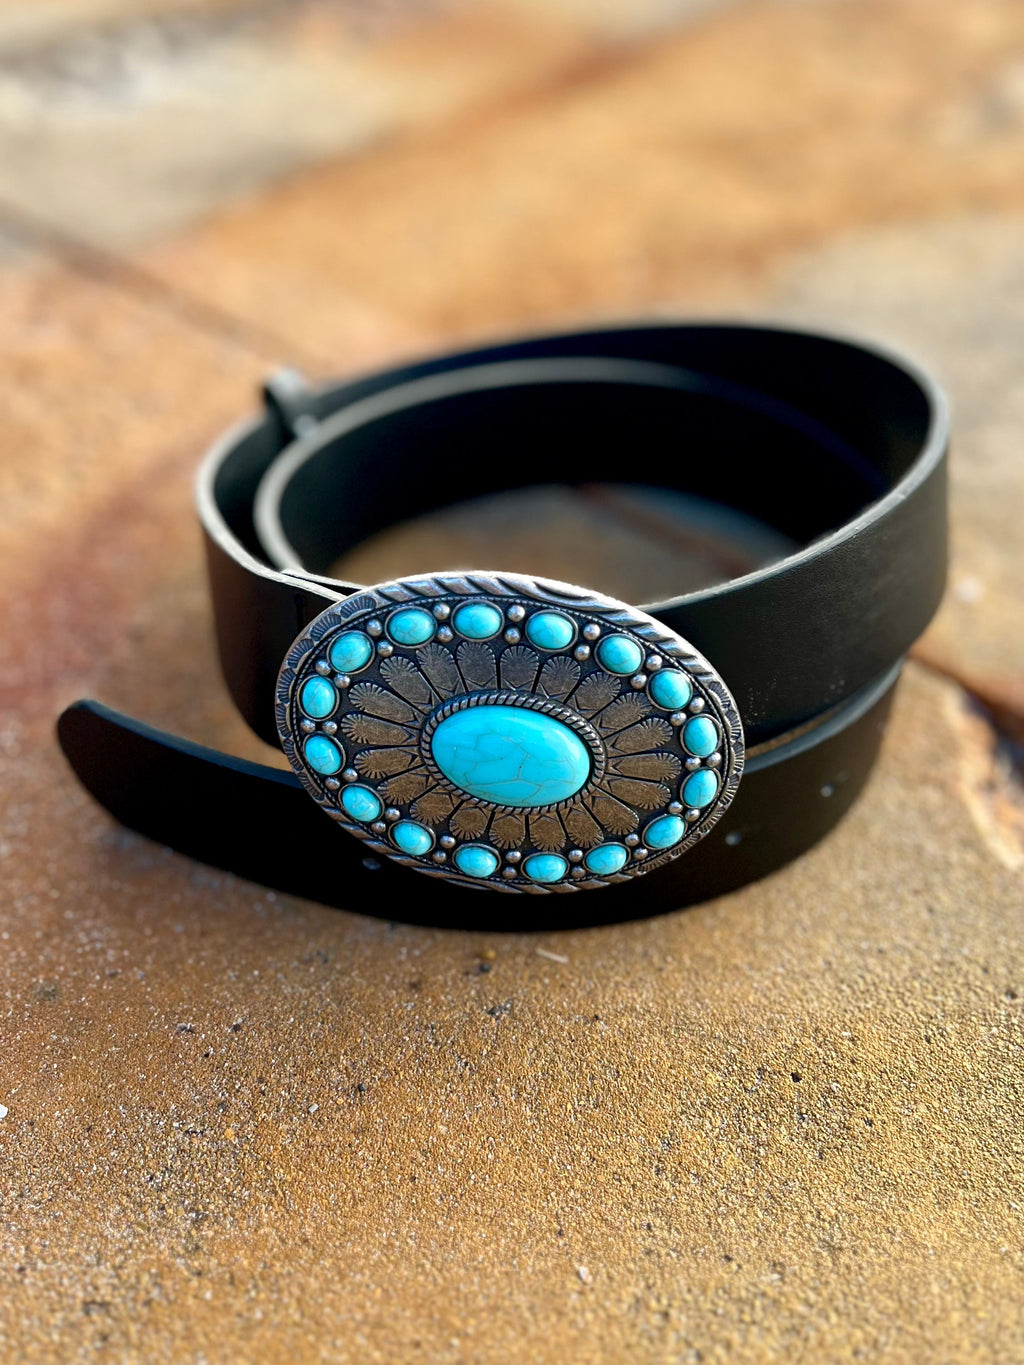 Be the King of the Ranch with The Center of His World Belt. Crafted from sleek black leather and adorned with a unique Silver & Turquoise Stone Concho Buckle, this 2" western belt will make you stand out in style. With a 41" length, it's the perfect fit for any cowboy. Yee-haw!